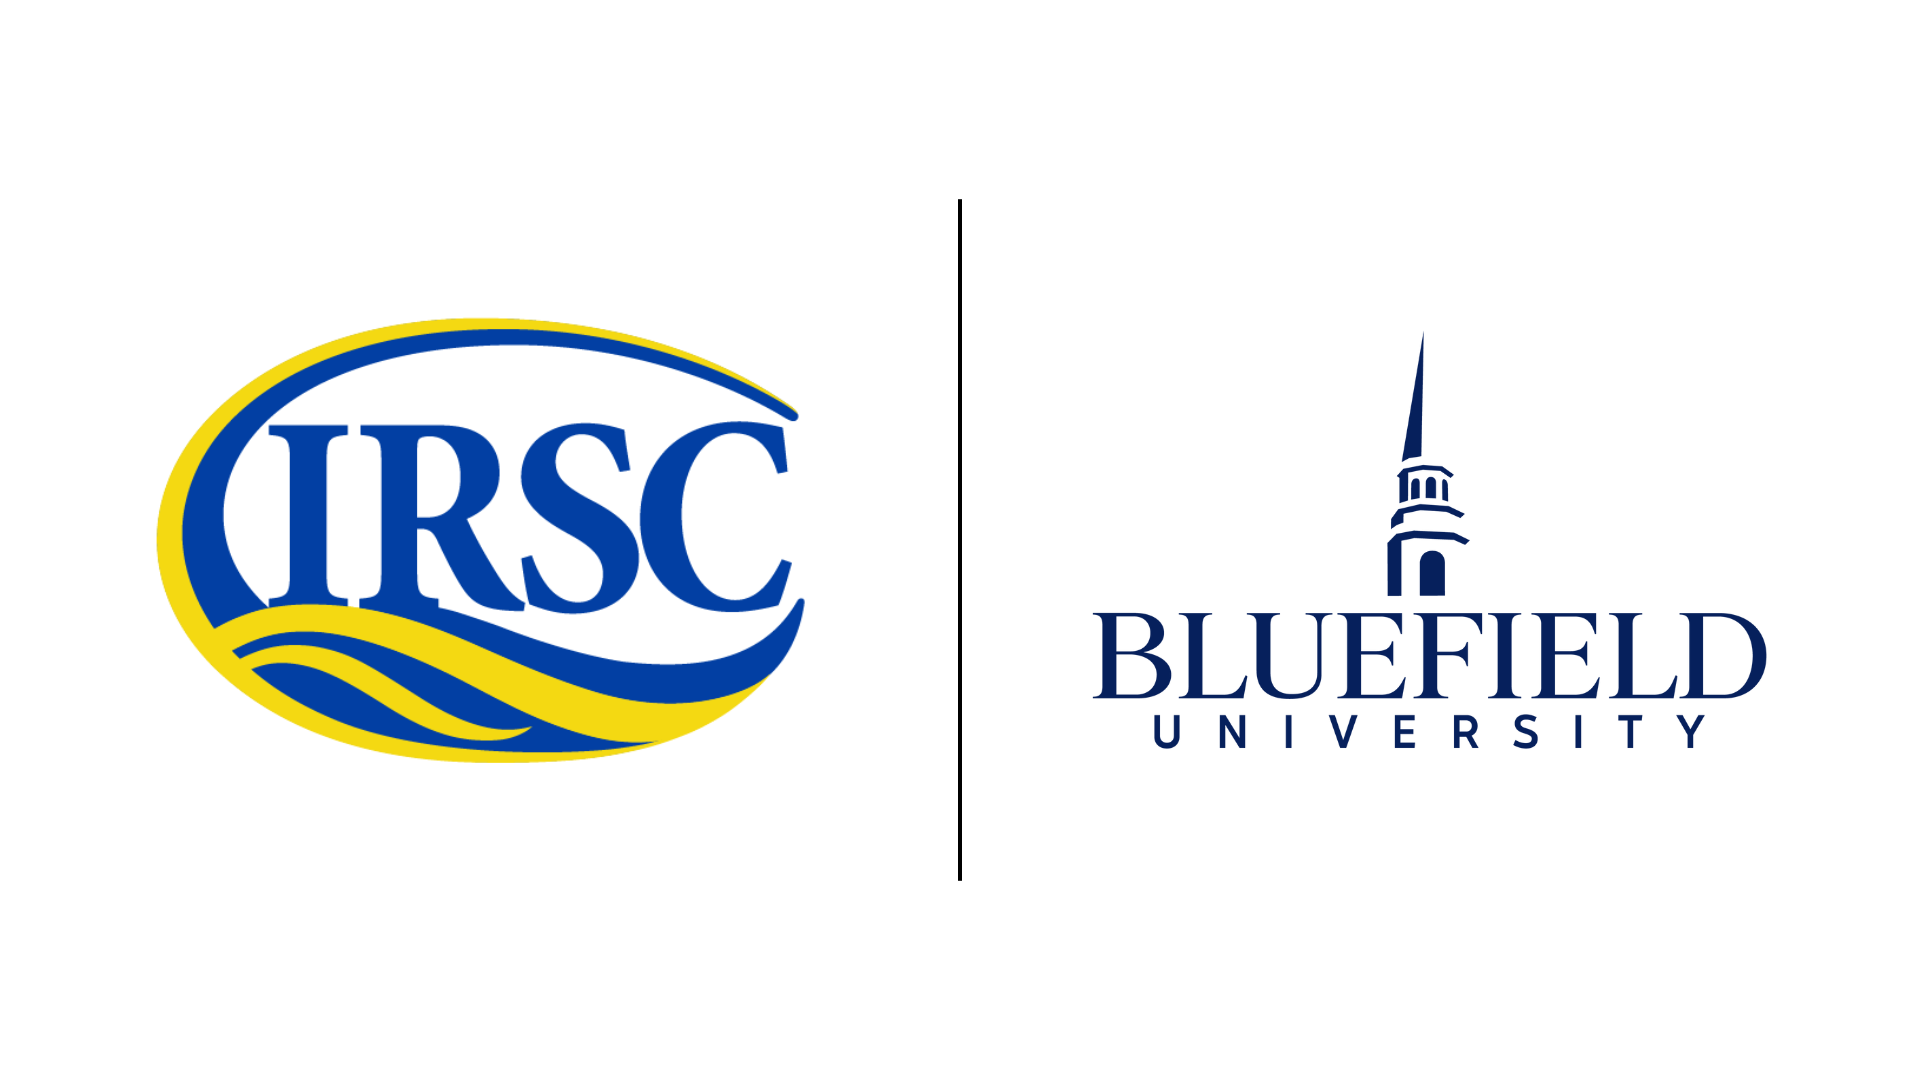 A Partnership Between Indian River State College and Bluefield University